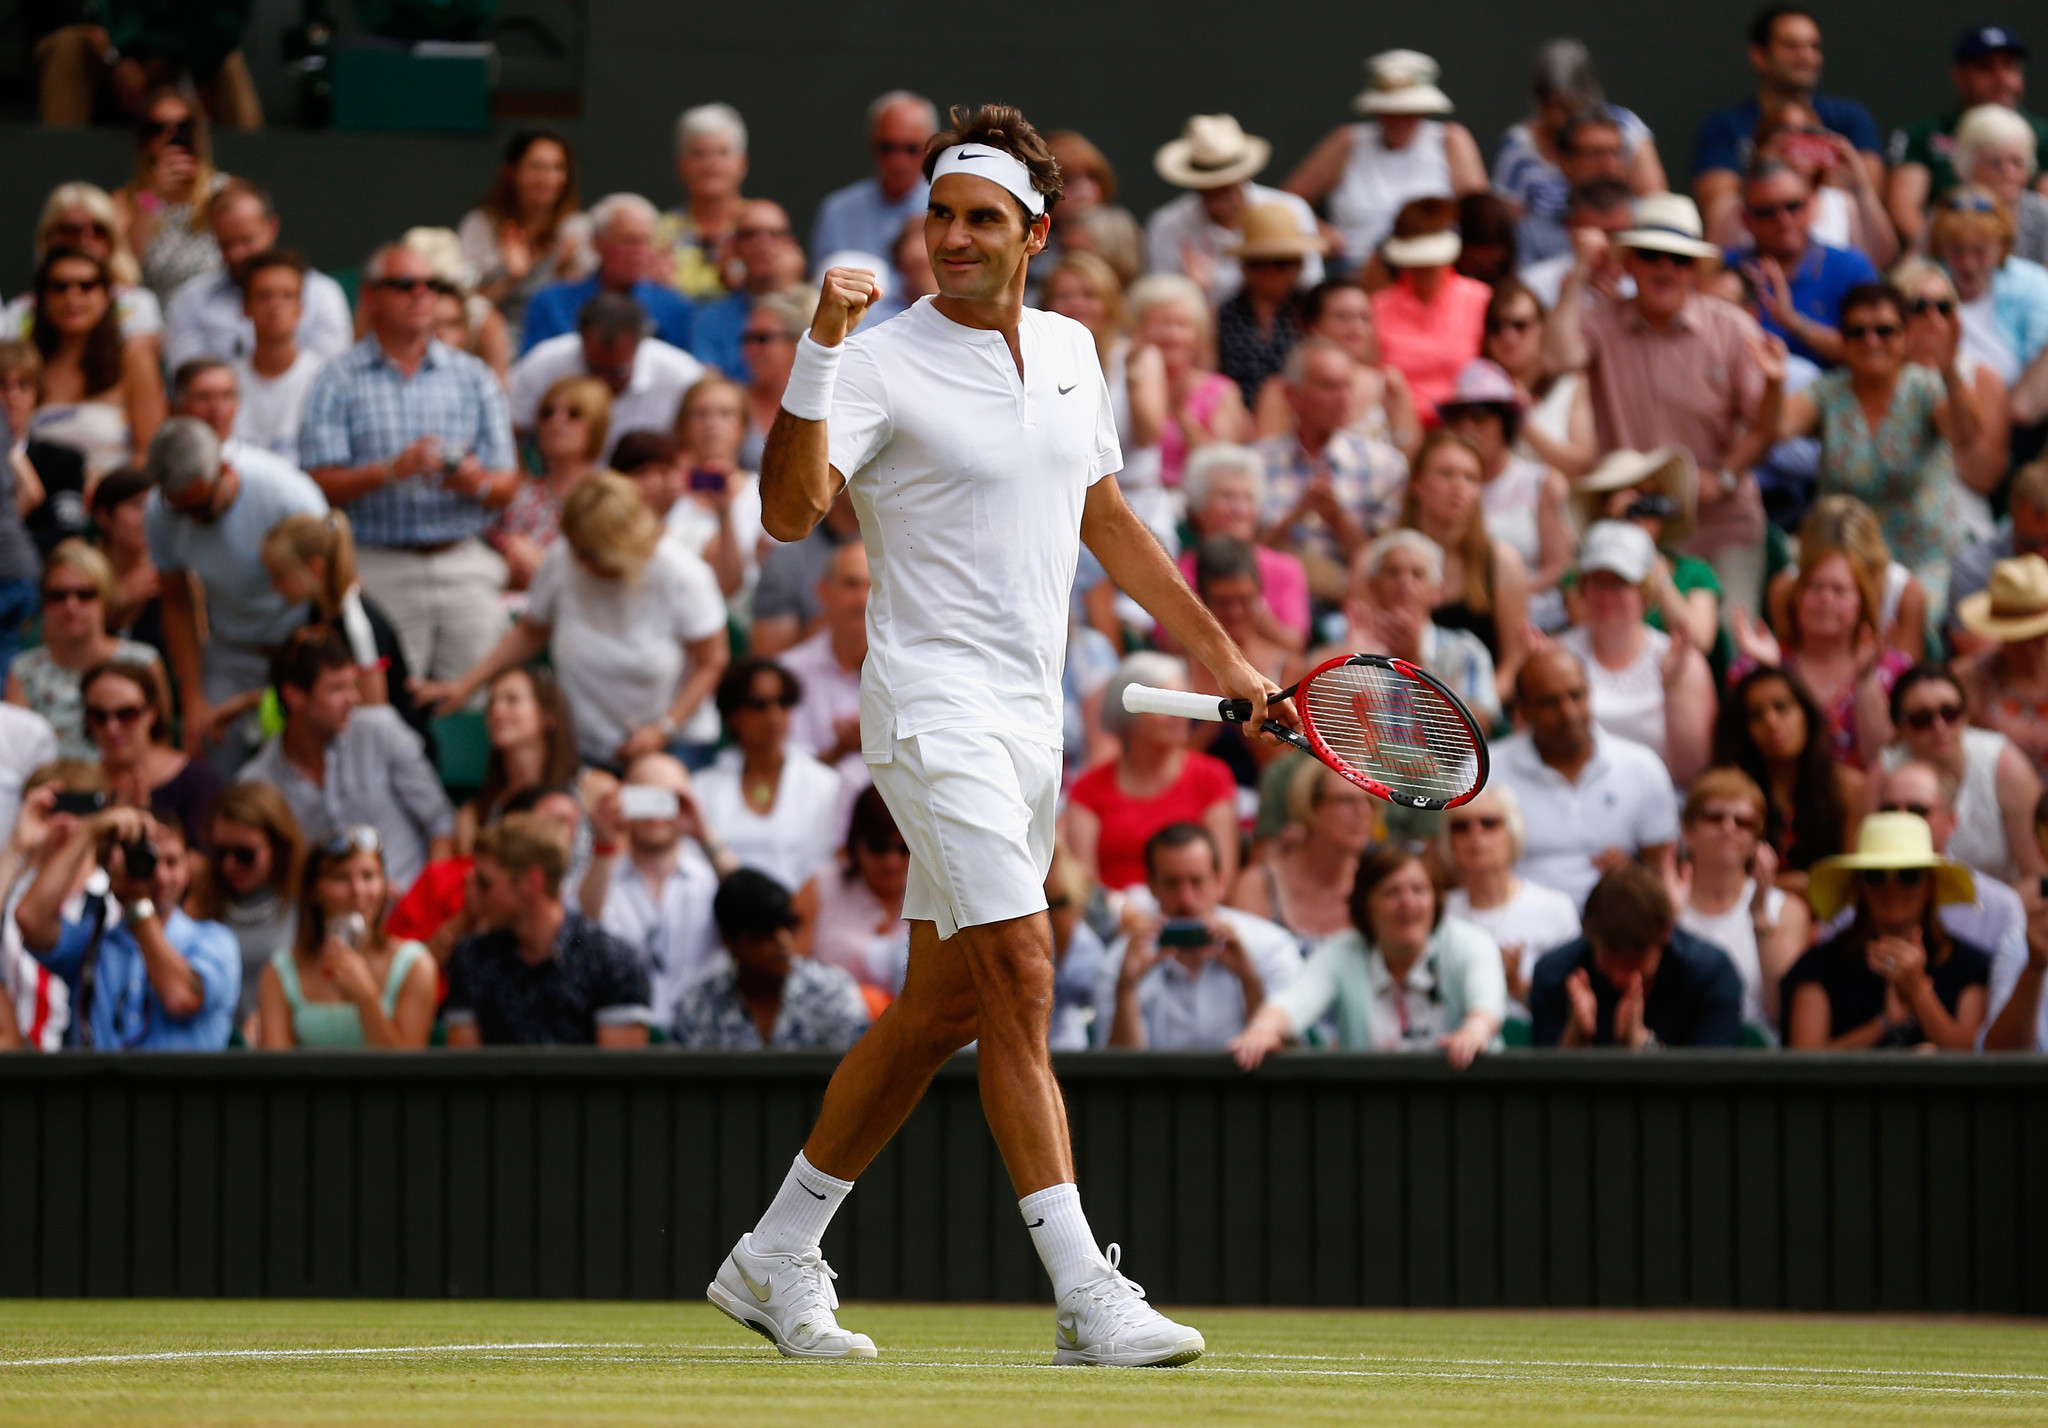 Federer beats Murray in 3 sets to reach 10th Wimbledon final - Chicago Tribune